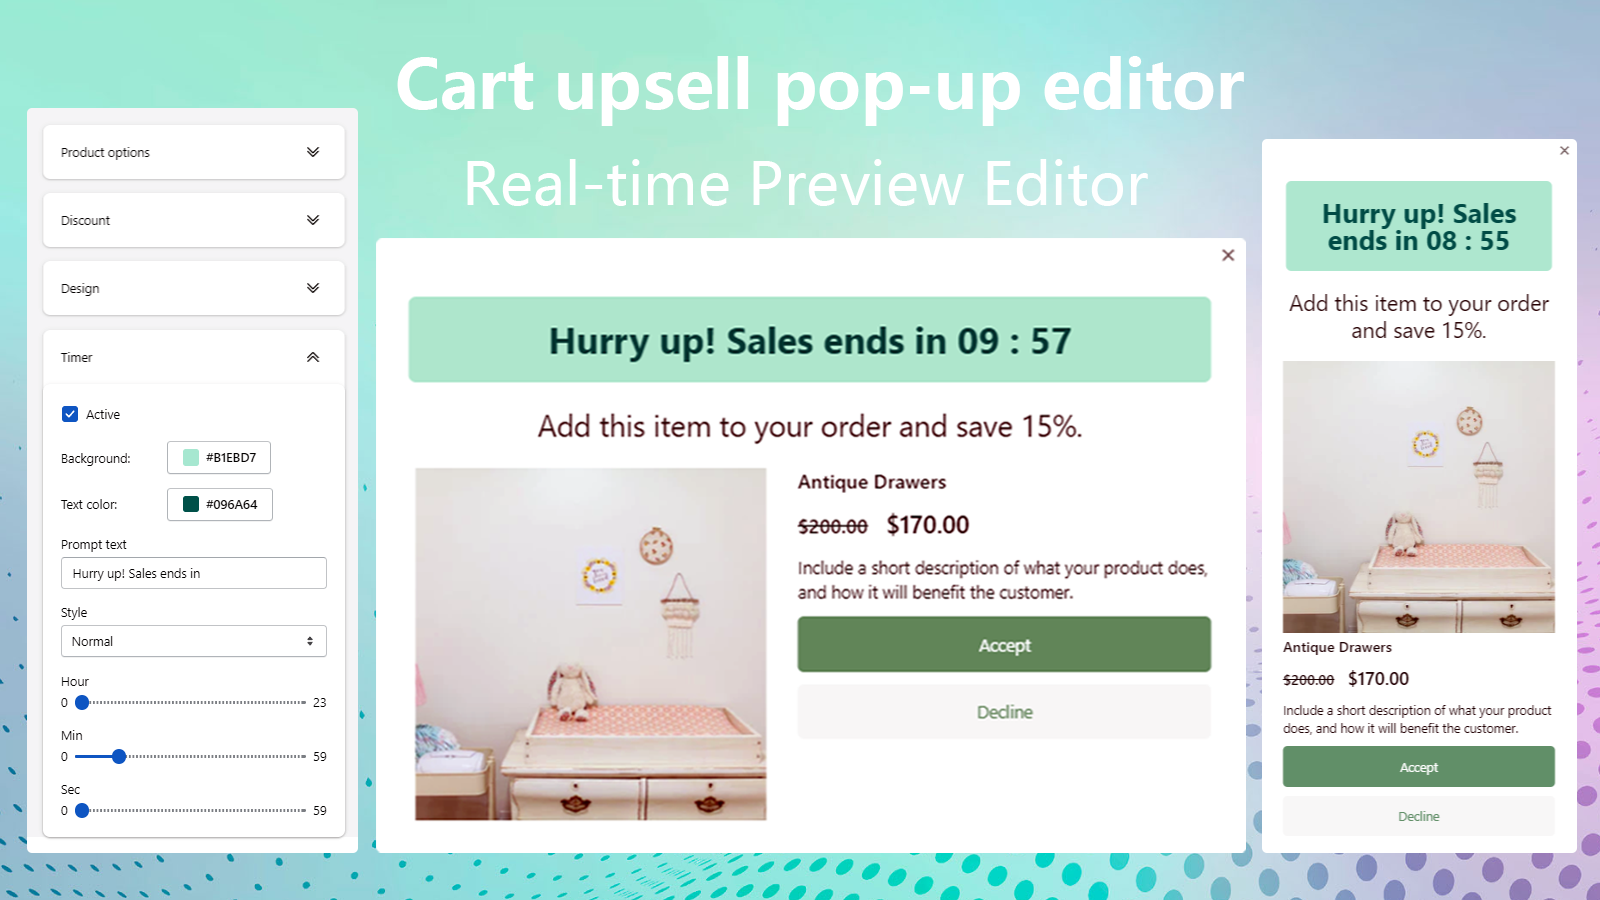 Cart upsell pop-up editor, Real-time Preview Editor